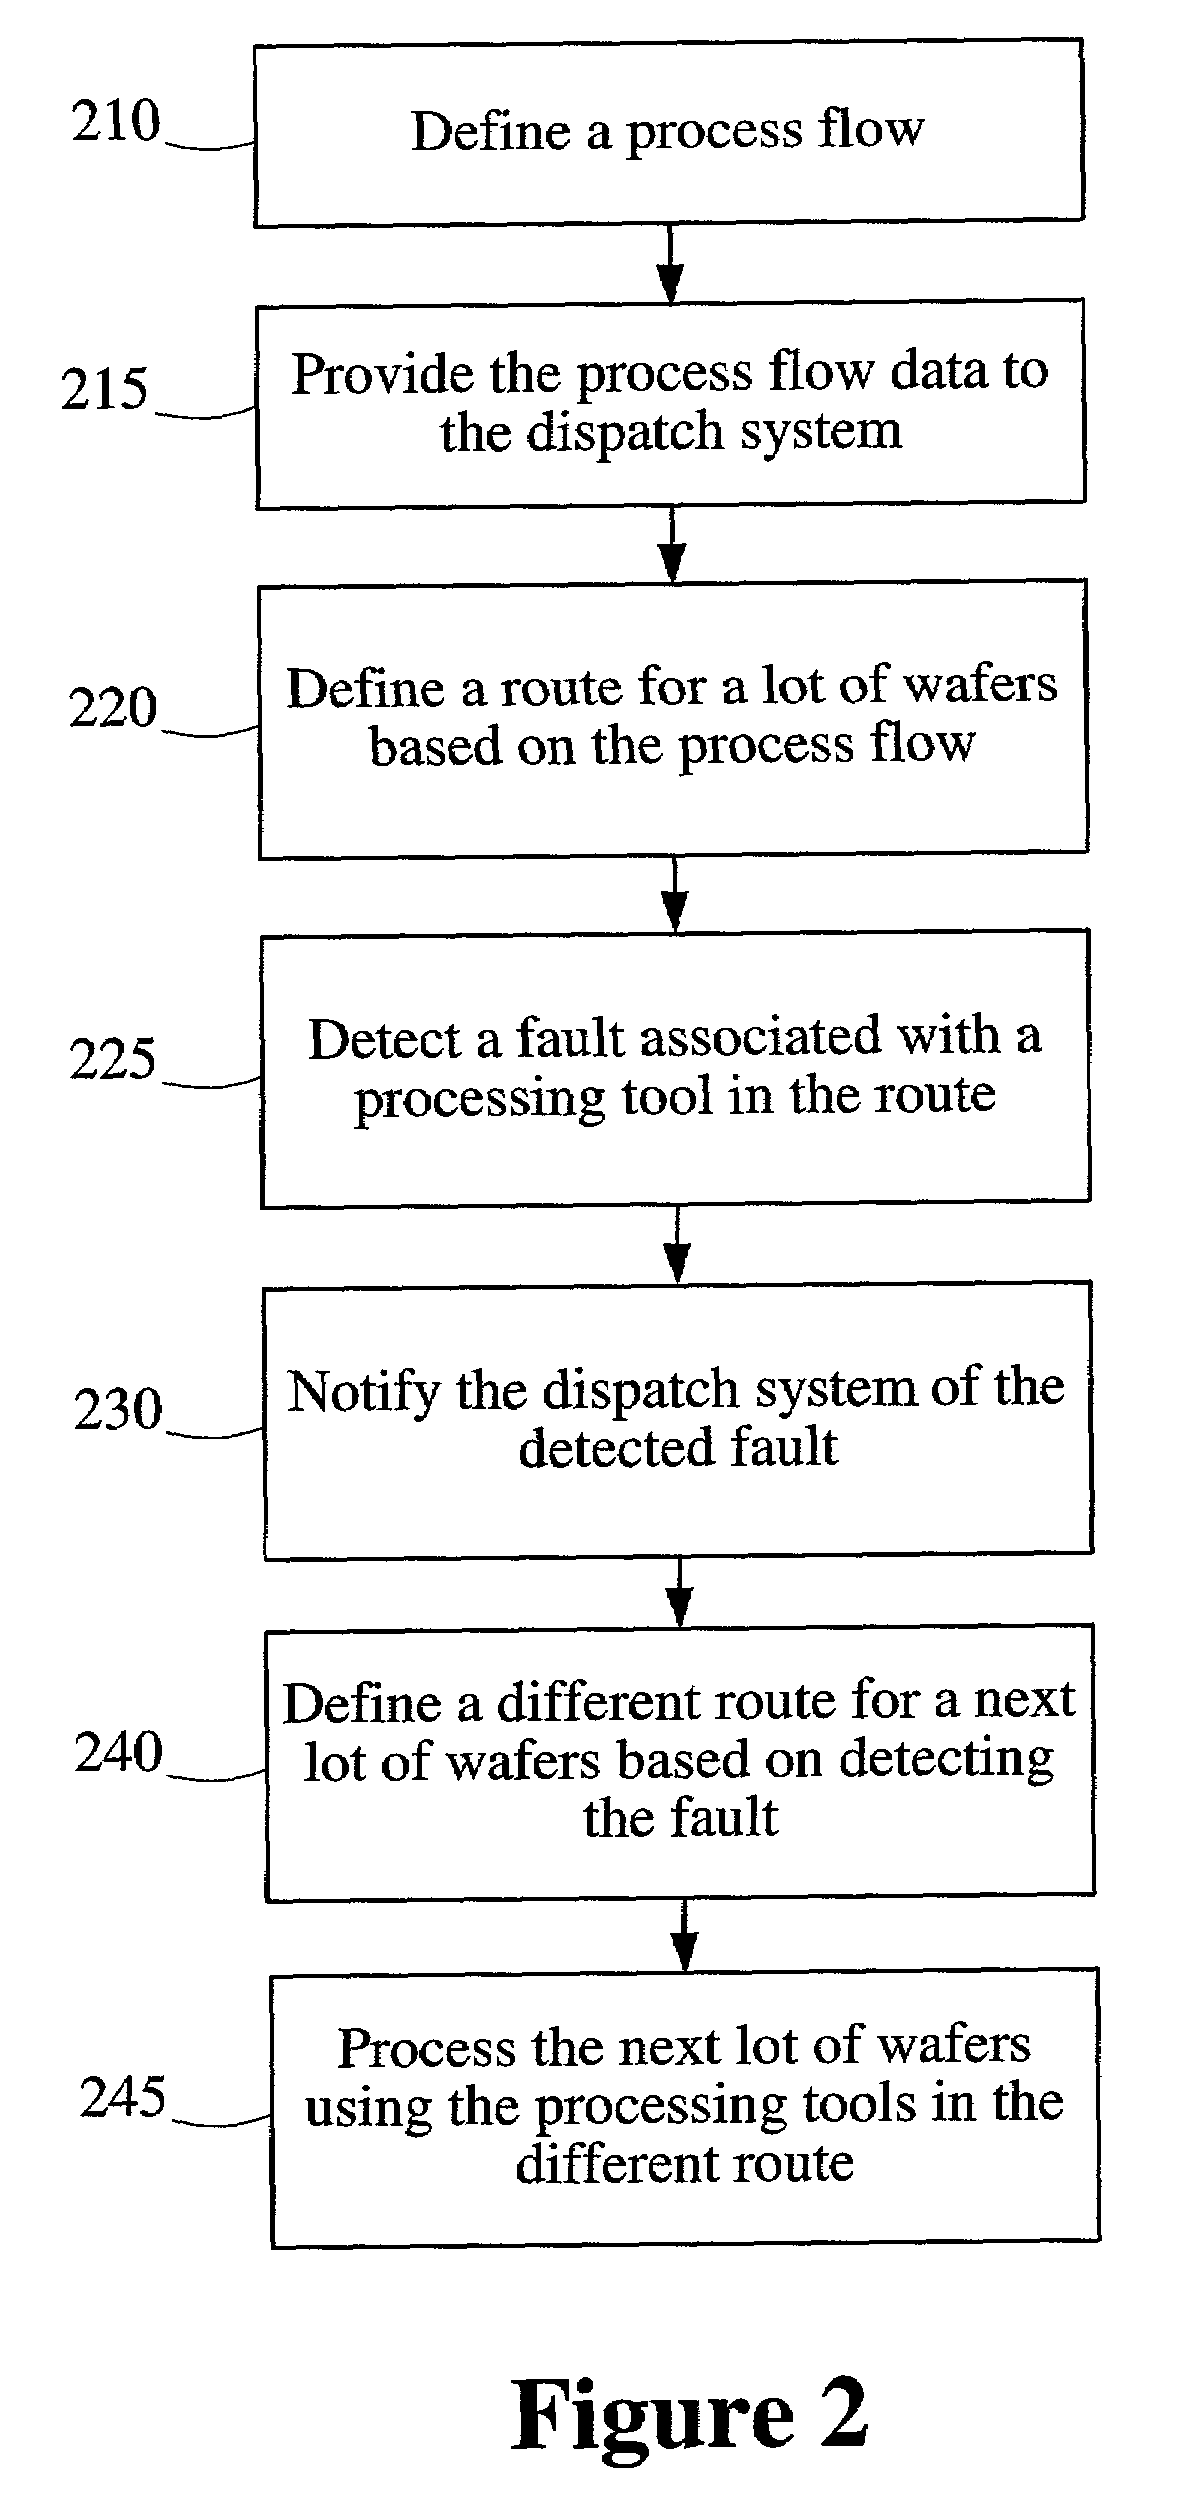 Routing workpieces based upon detecting a fault